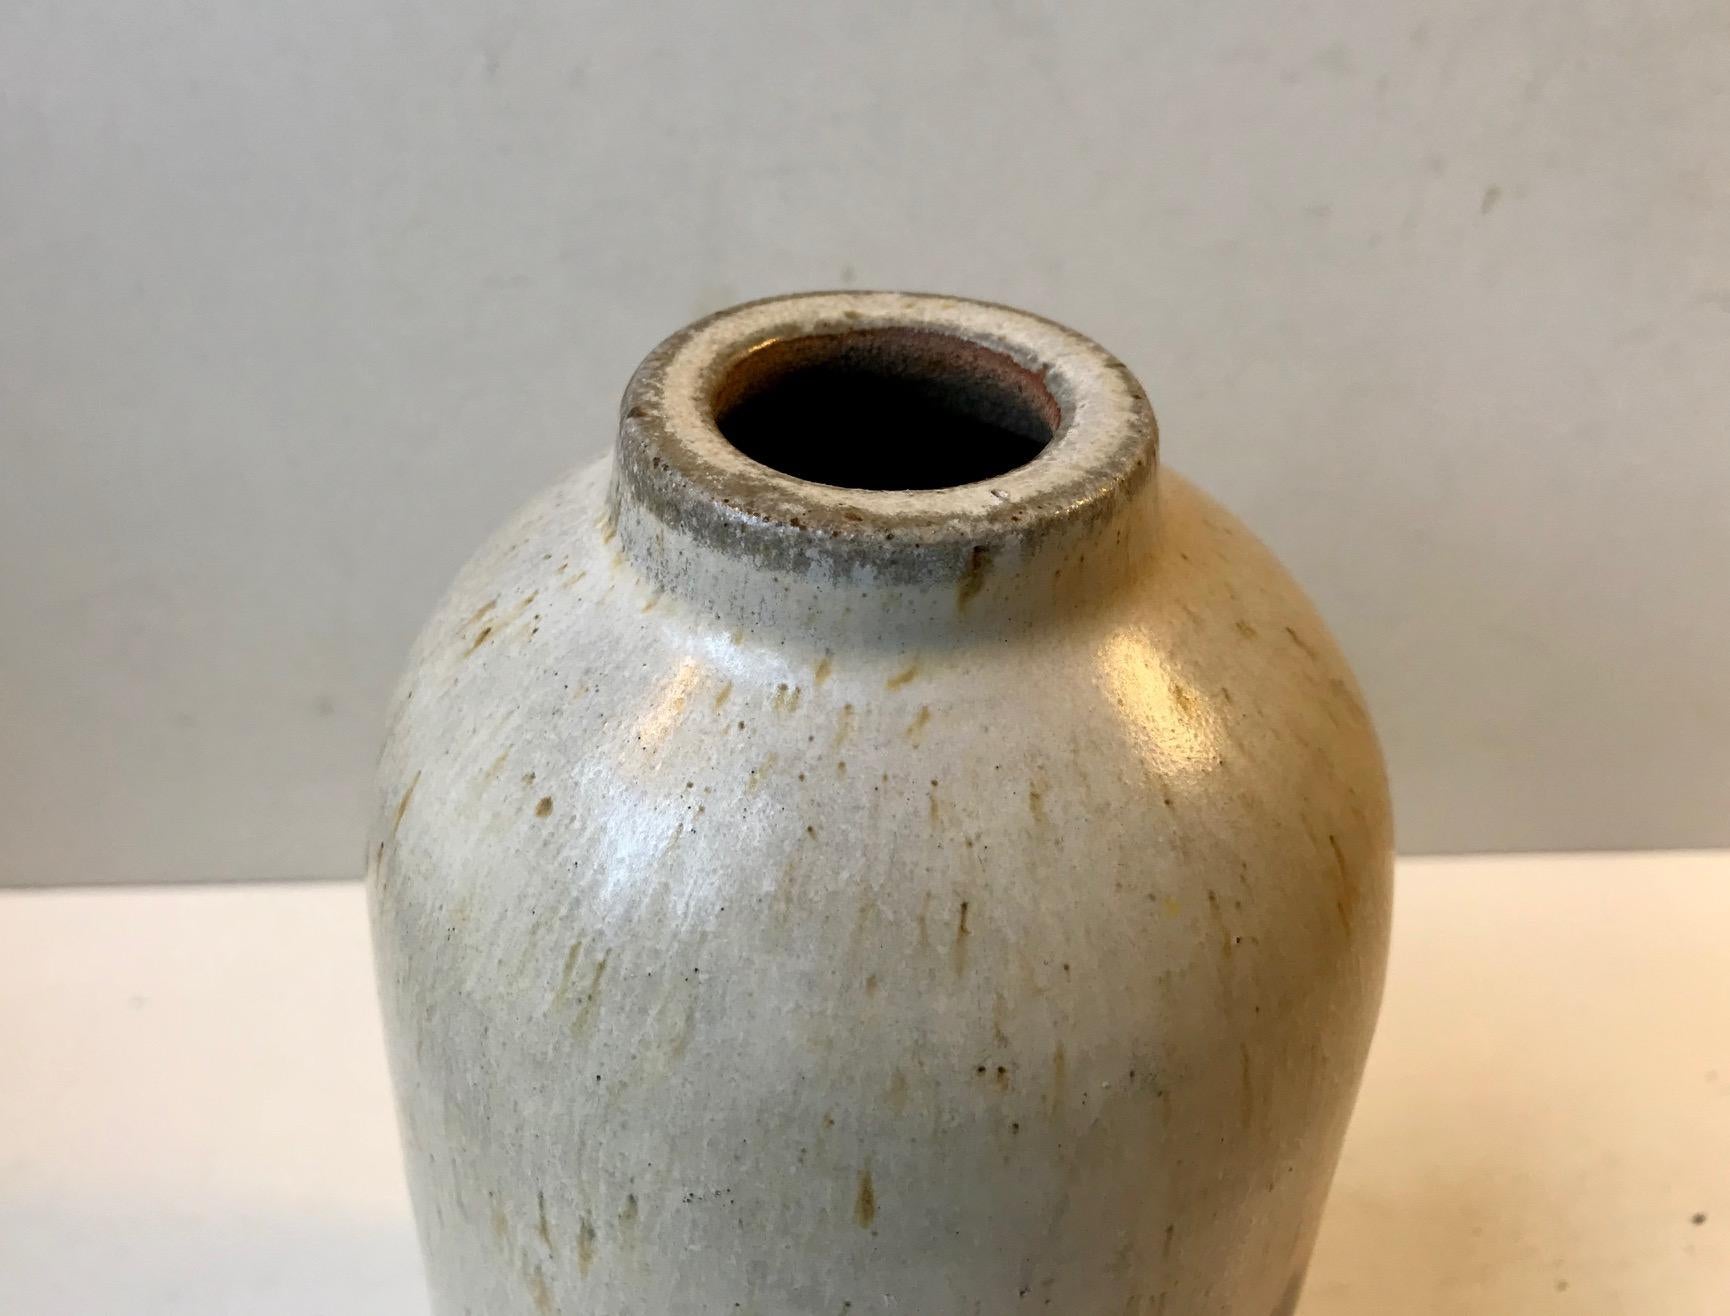 Haresfur glazed beauty with abstract motif in an elongated ovoid shape. This unique stoneware vase was designed by Danish artist Ellen Madsen and manufactured in her studio Lee Keramik in Denmark during the 1970s. Ellen Madsen designed together with